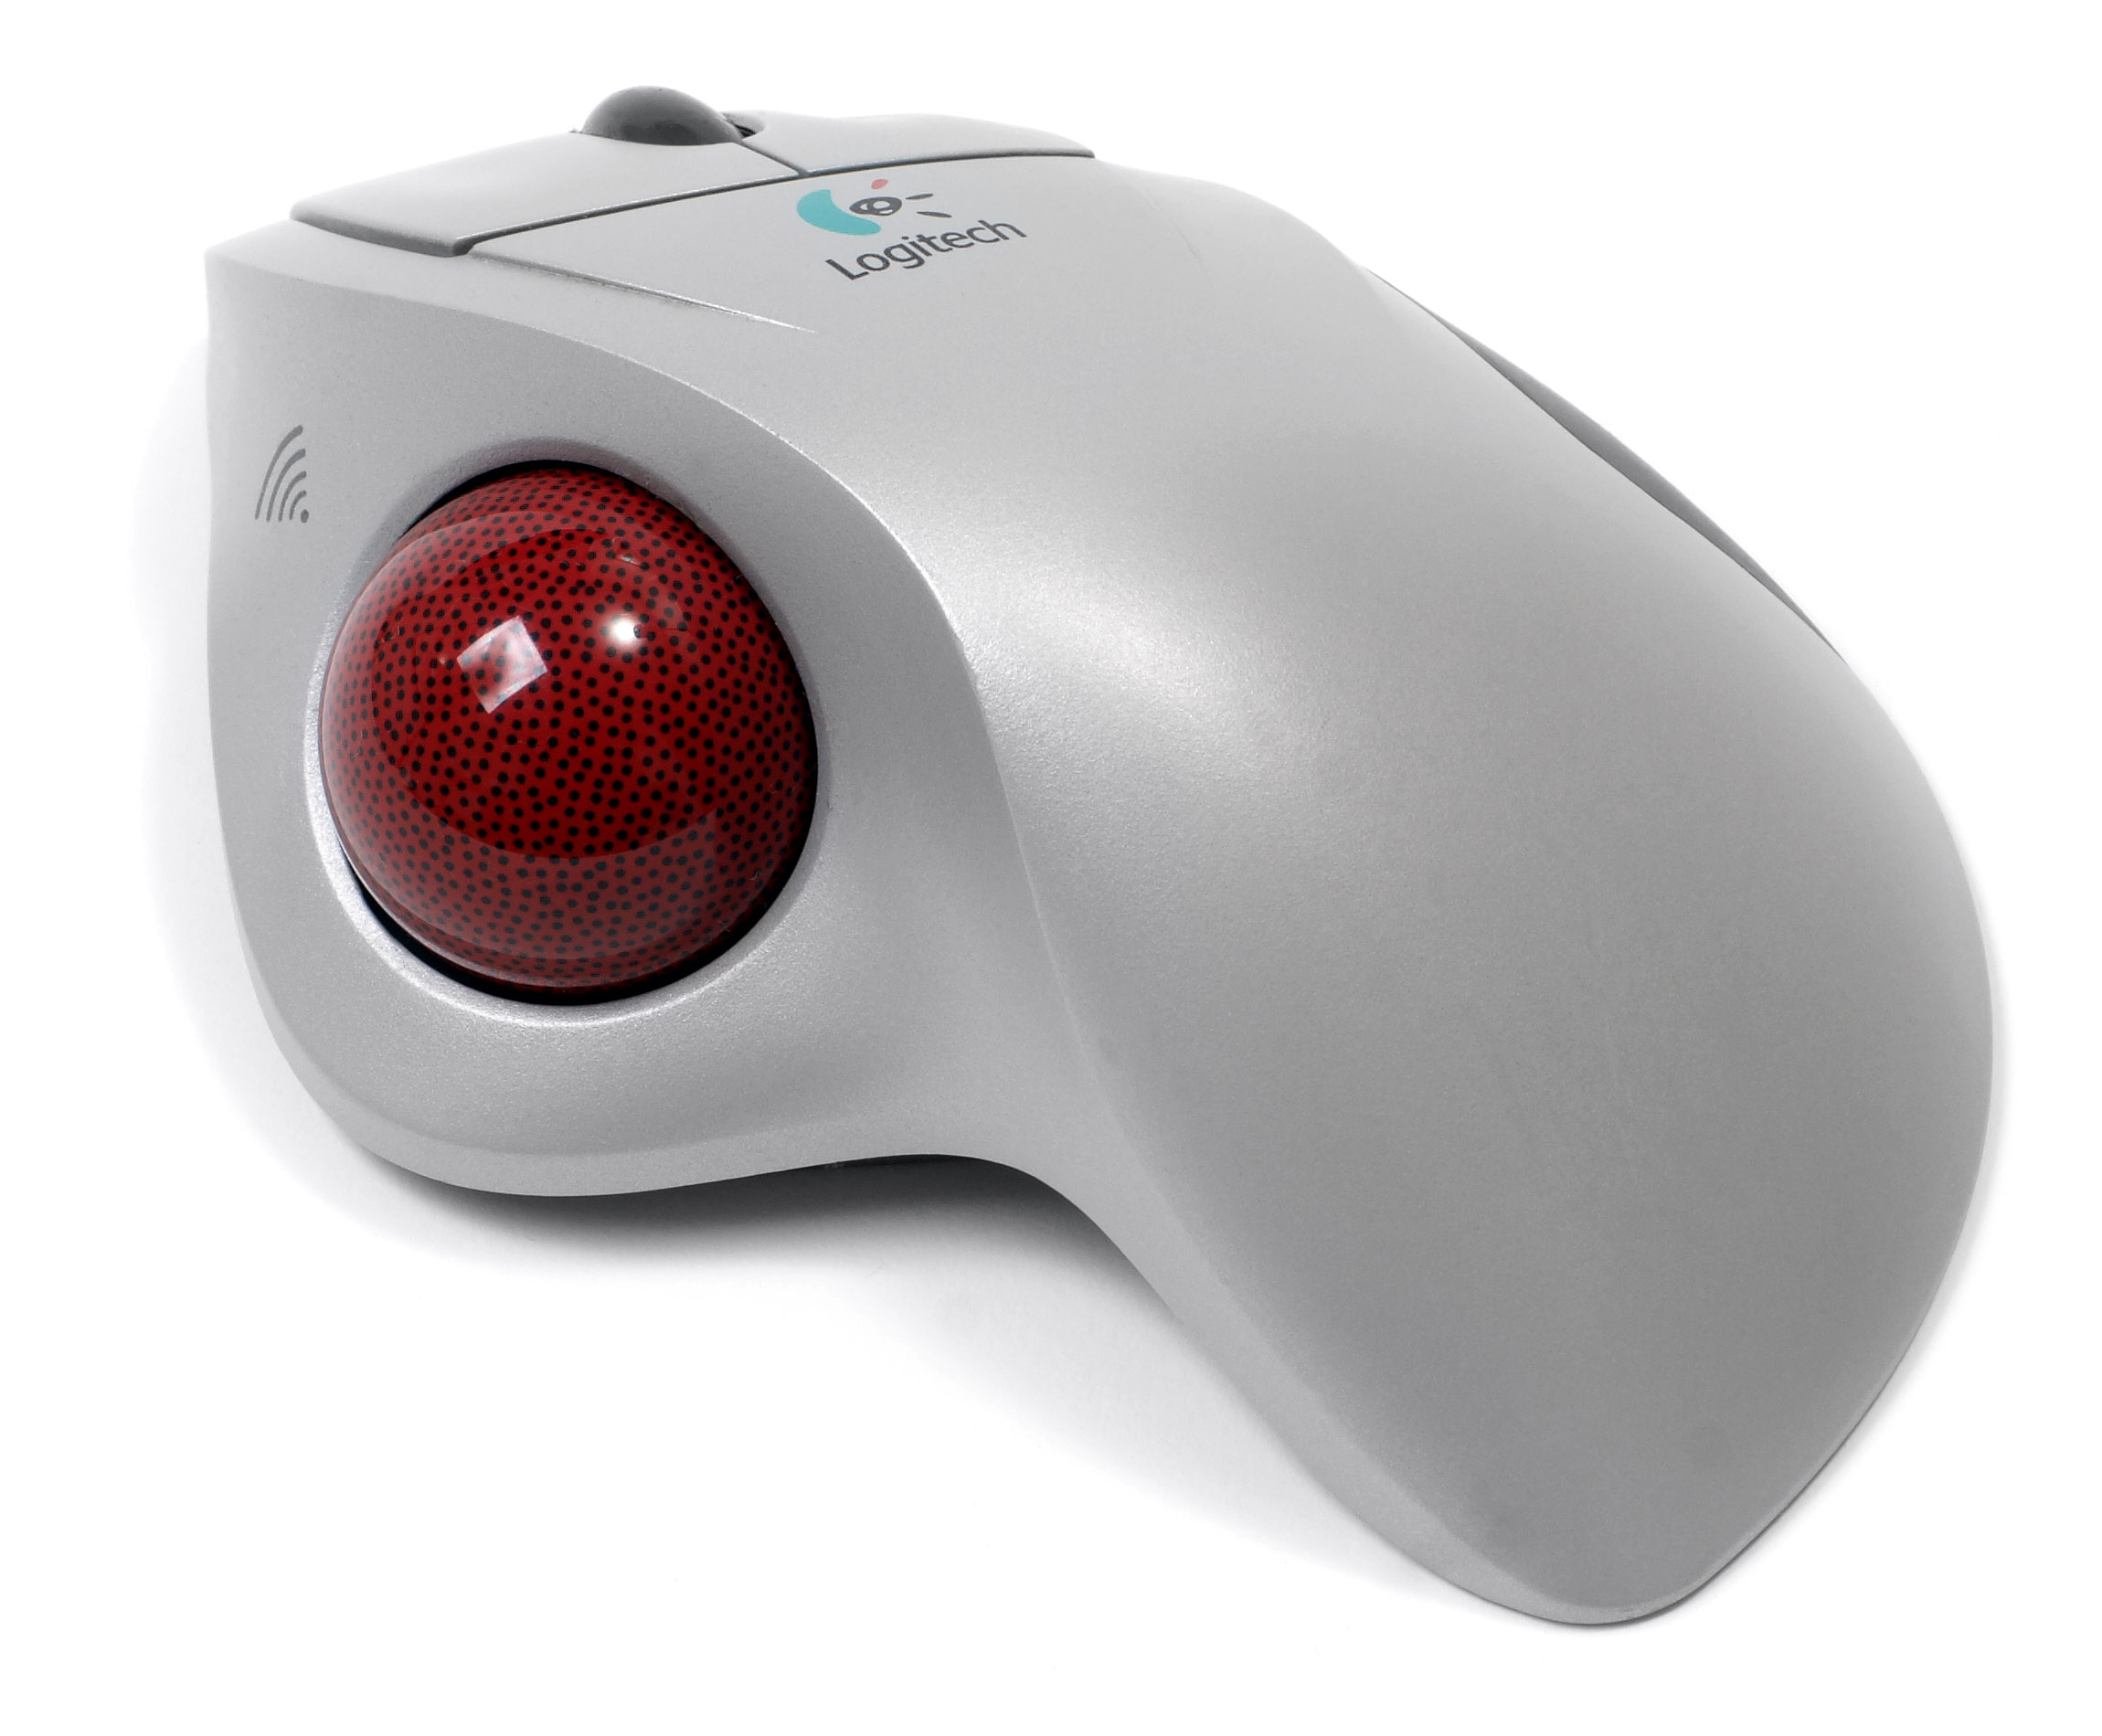 image: Wireless-trackman-mouse